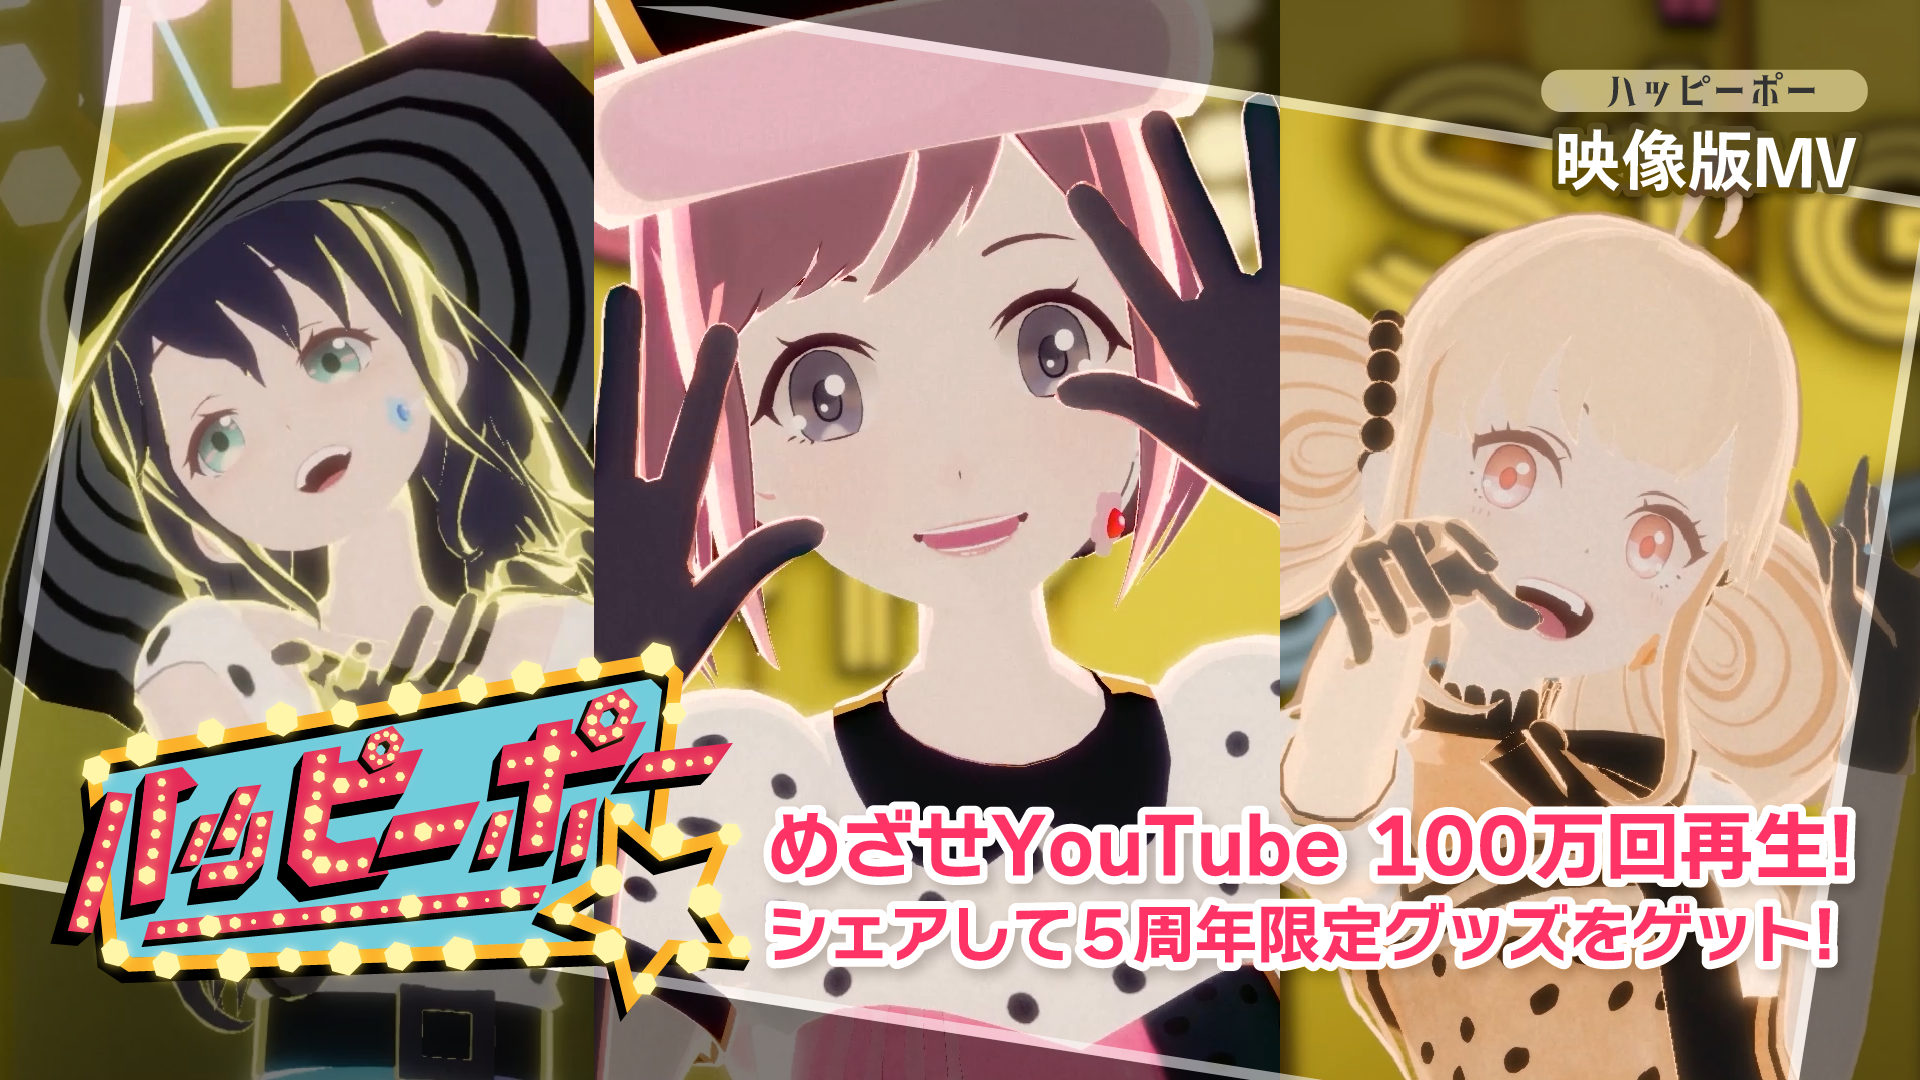 【1 Million Views Challenge 💯】Interactive Music Video「Happy People」Full MV Released on YouTube!